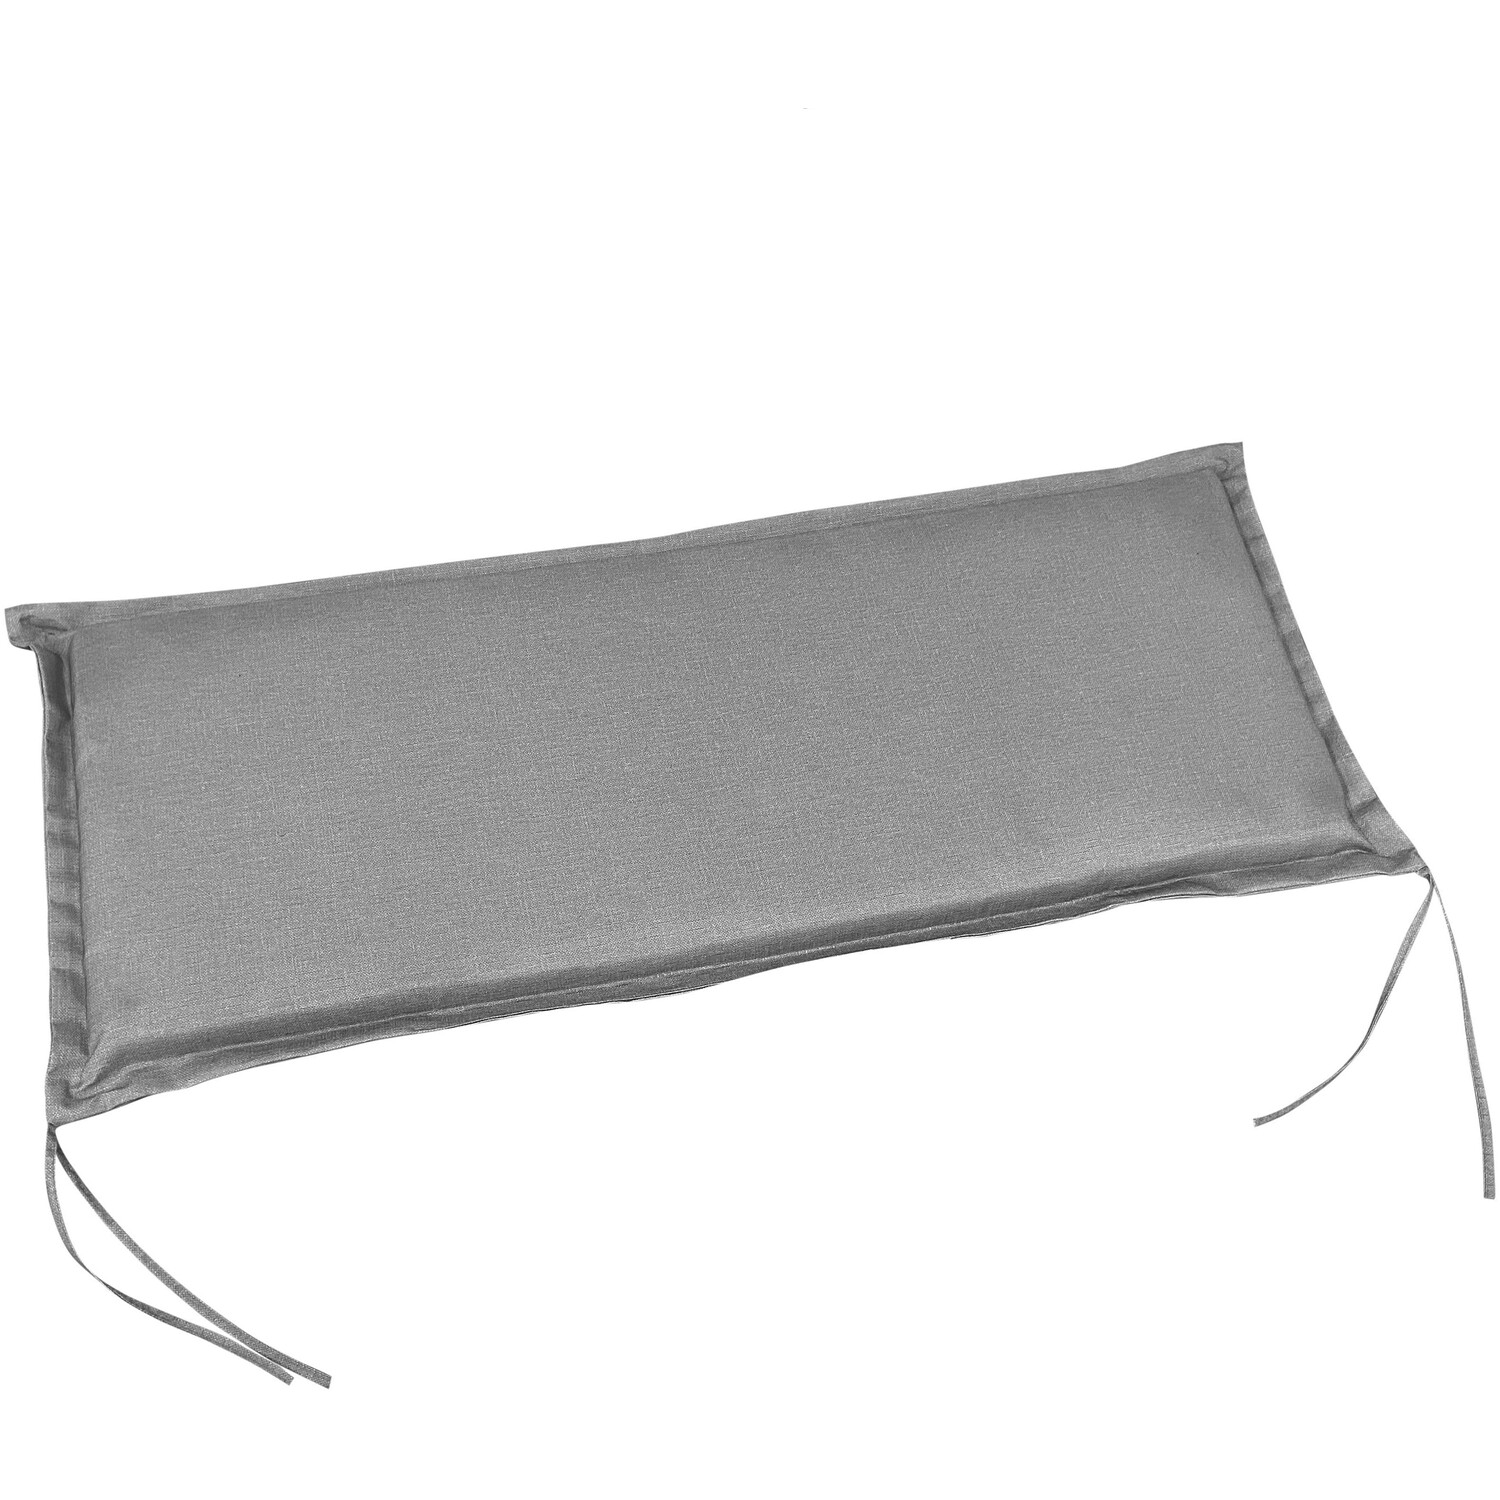 Malay Bench Cushion - Taupe / 2 Seater Bench Image